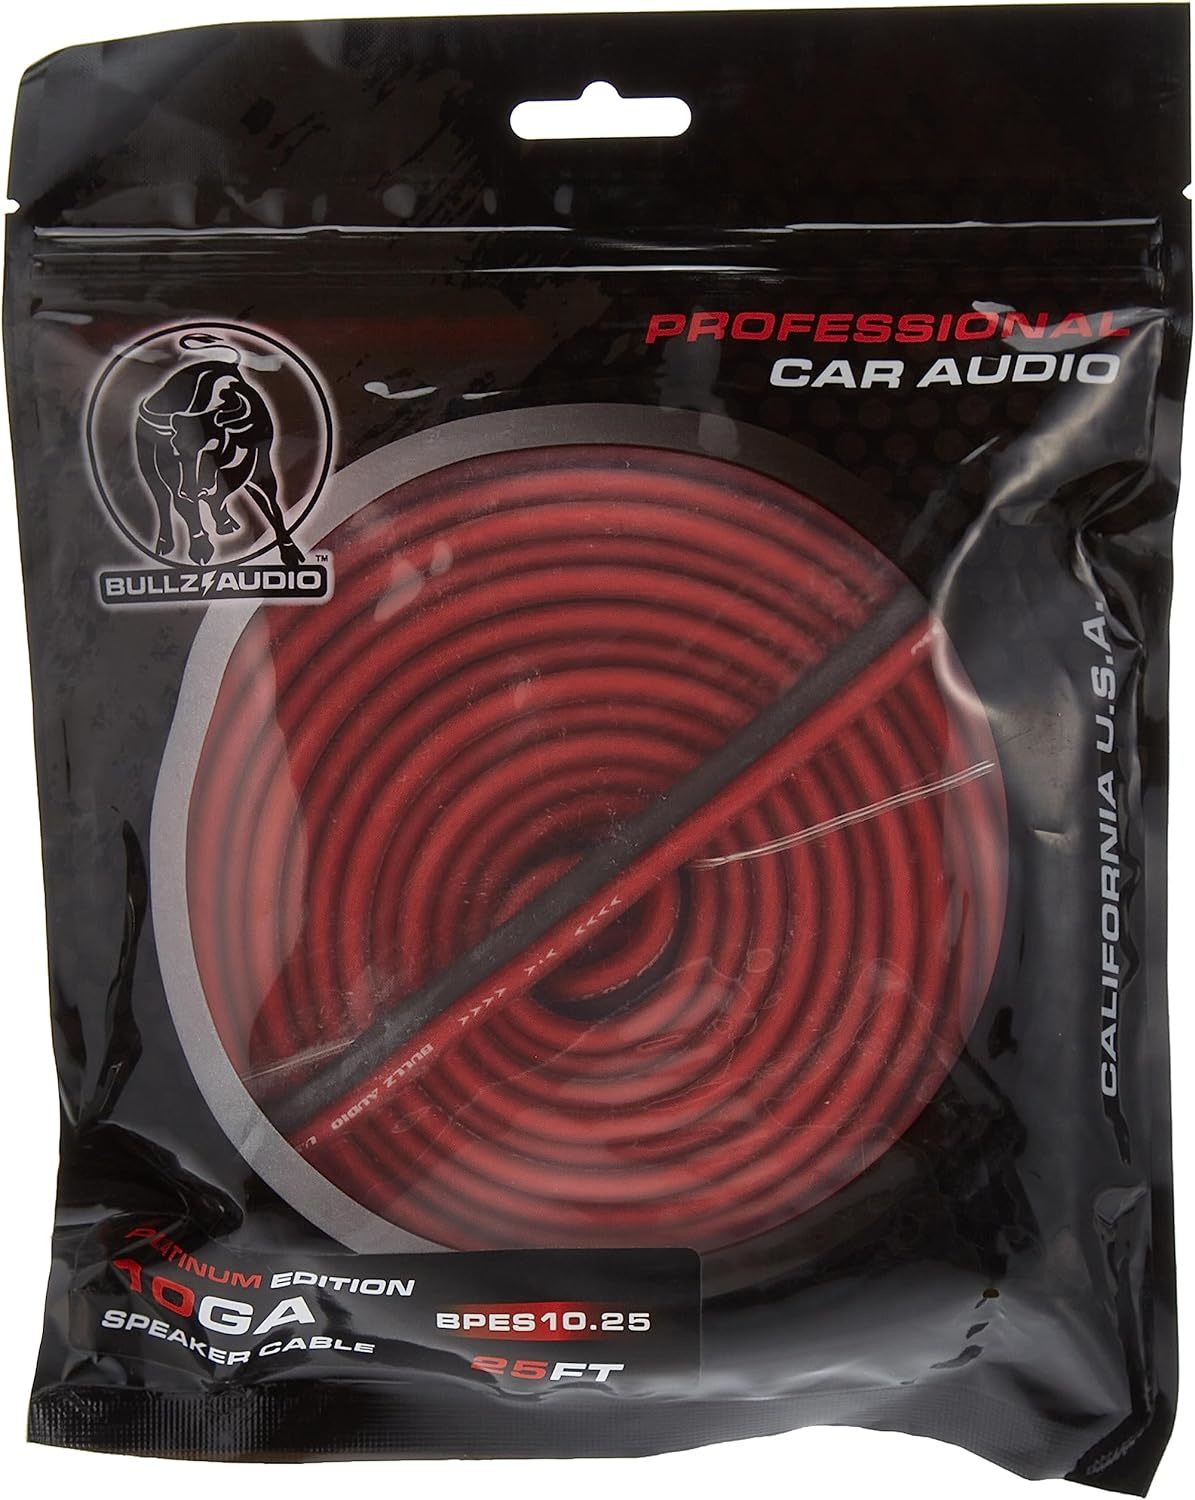 Primary image for  25' True 10 Gauge AWG Car Home Audio Speaker Wire Cable Spool Clear Re